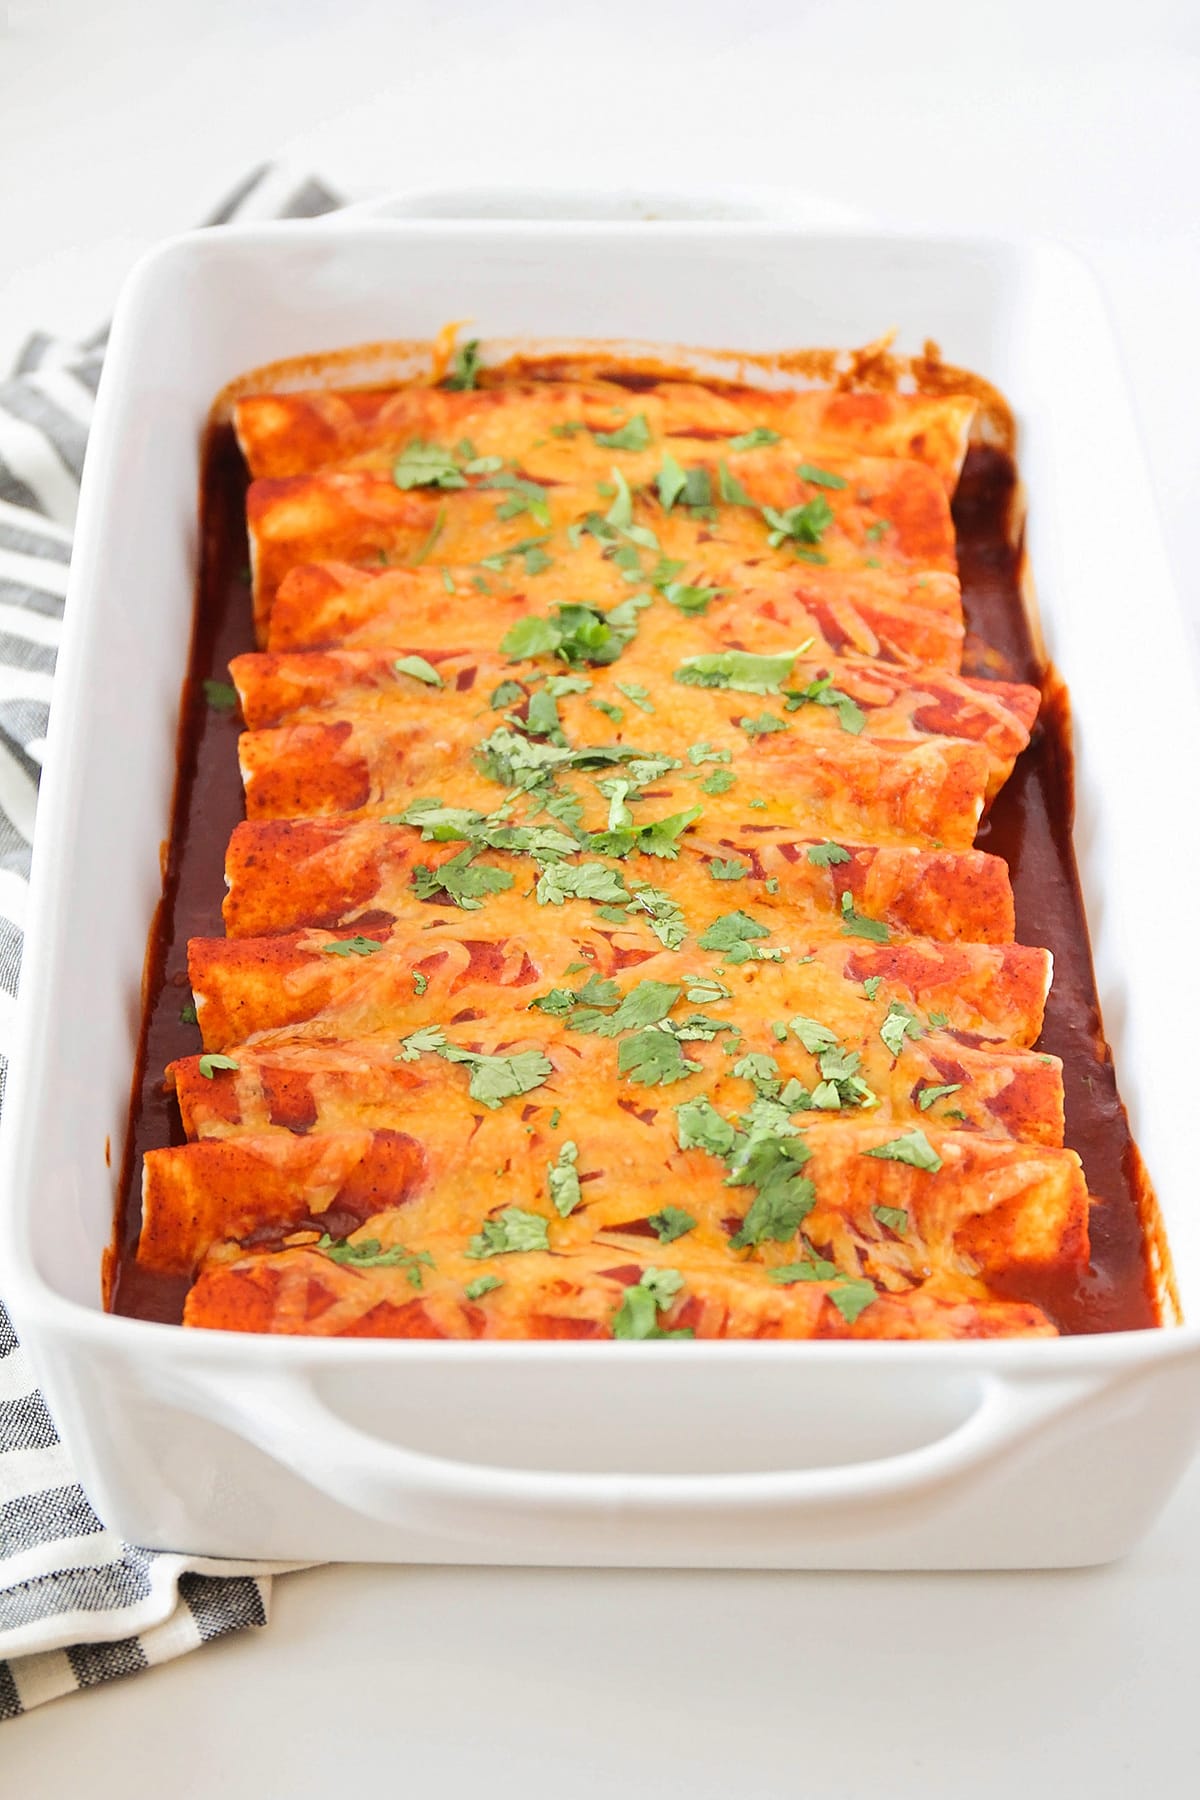 Easy shredded Beef Enchiladas in a casserole dish topped with cheese.